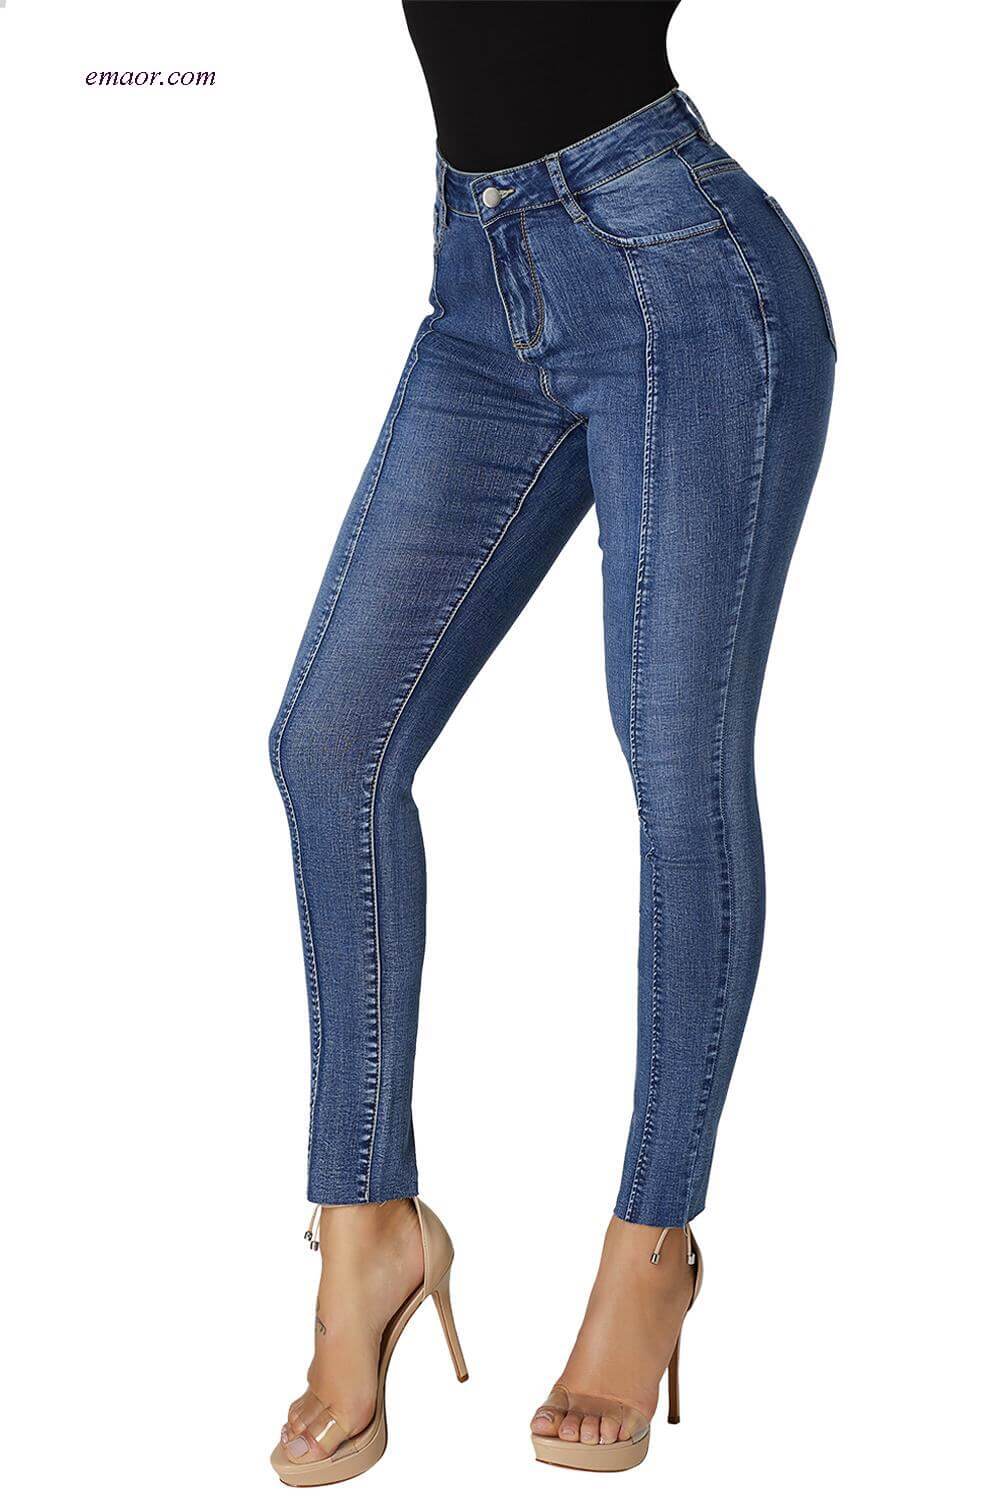 Wholesale Women's Accent Best Length Jeans Skinny Jeans on Sale